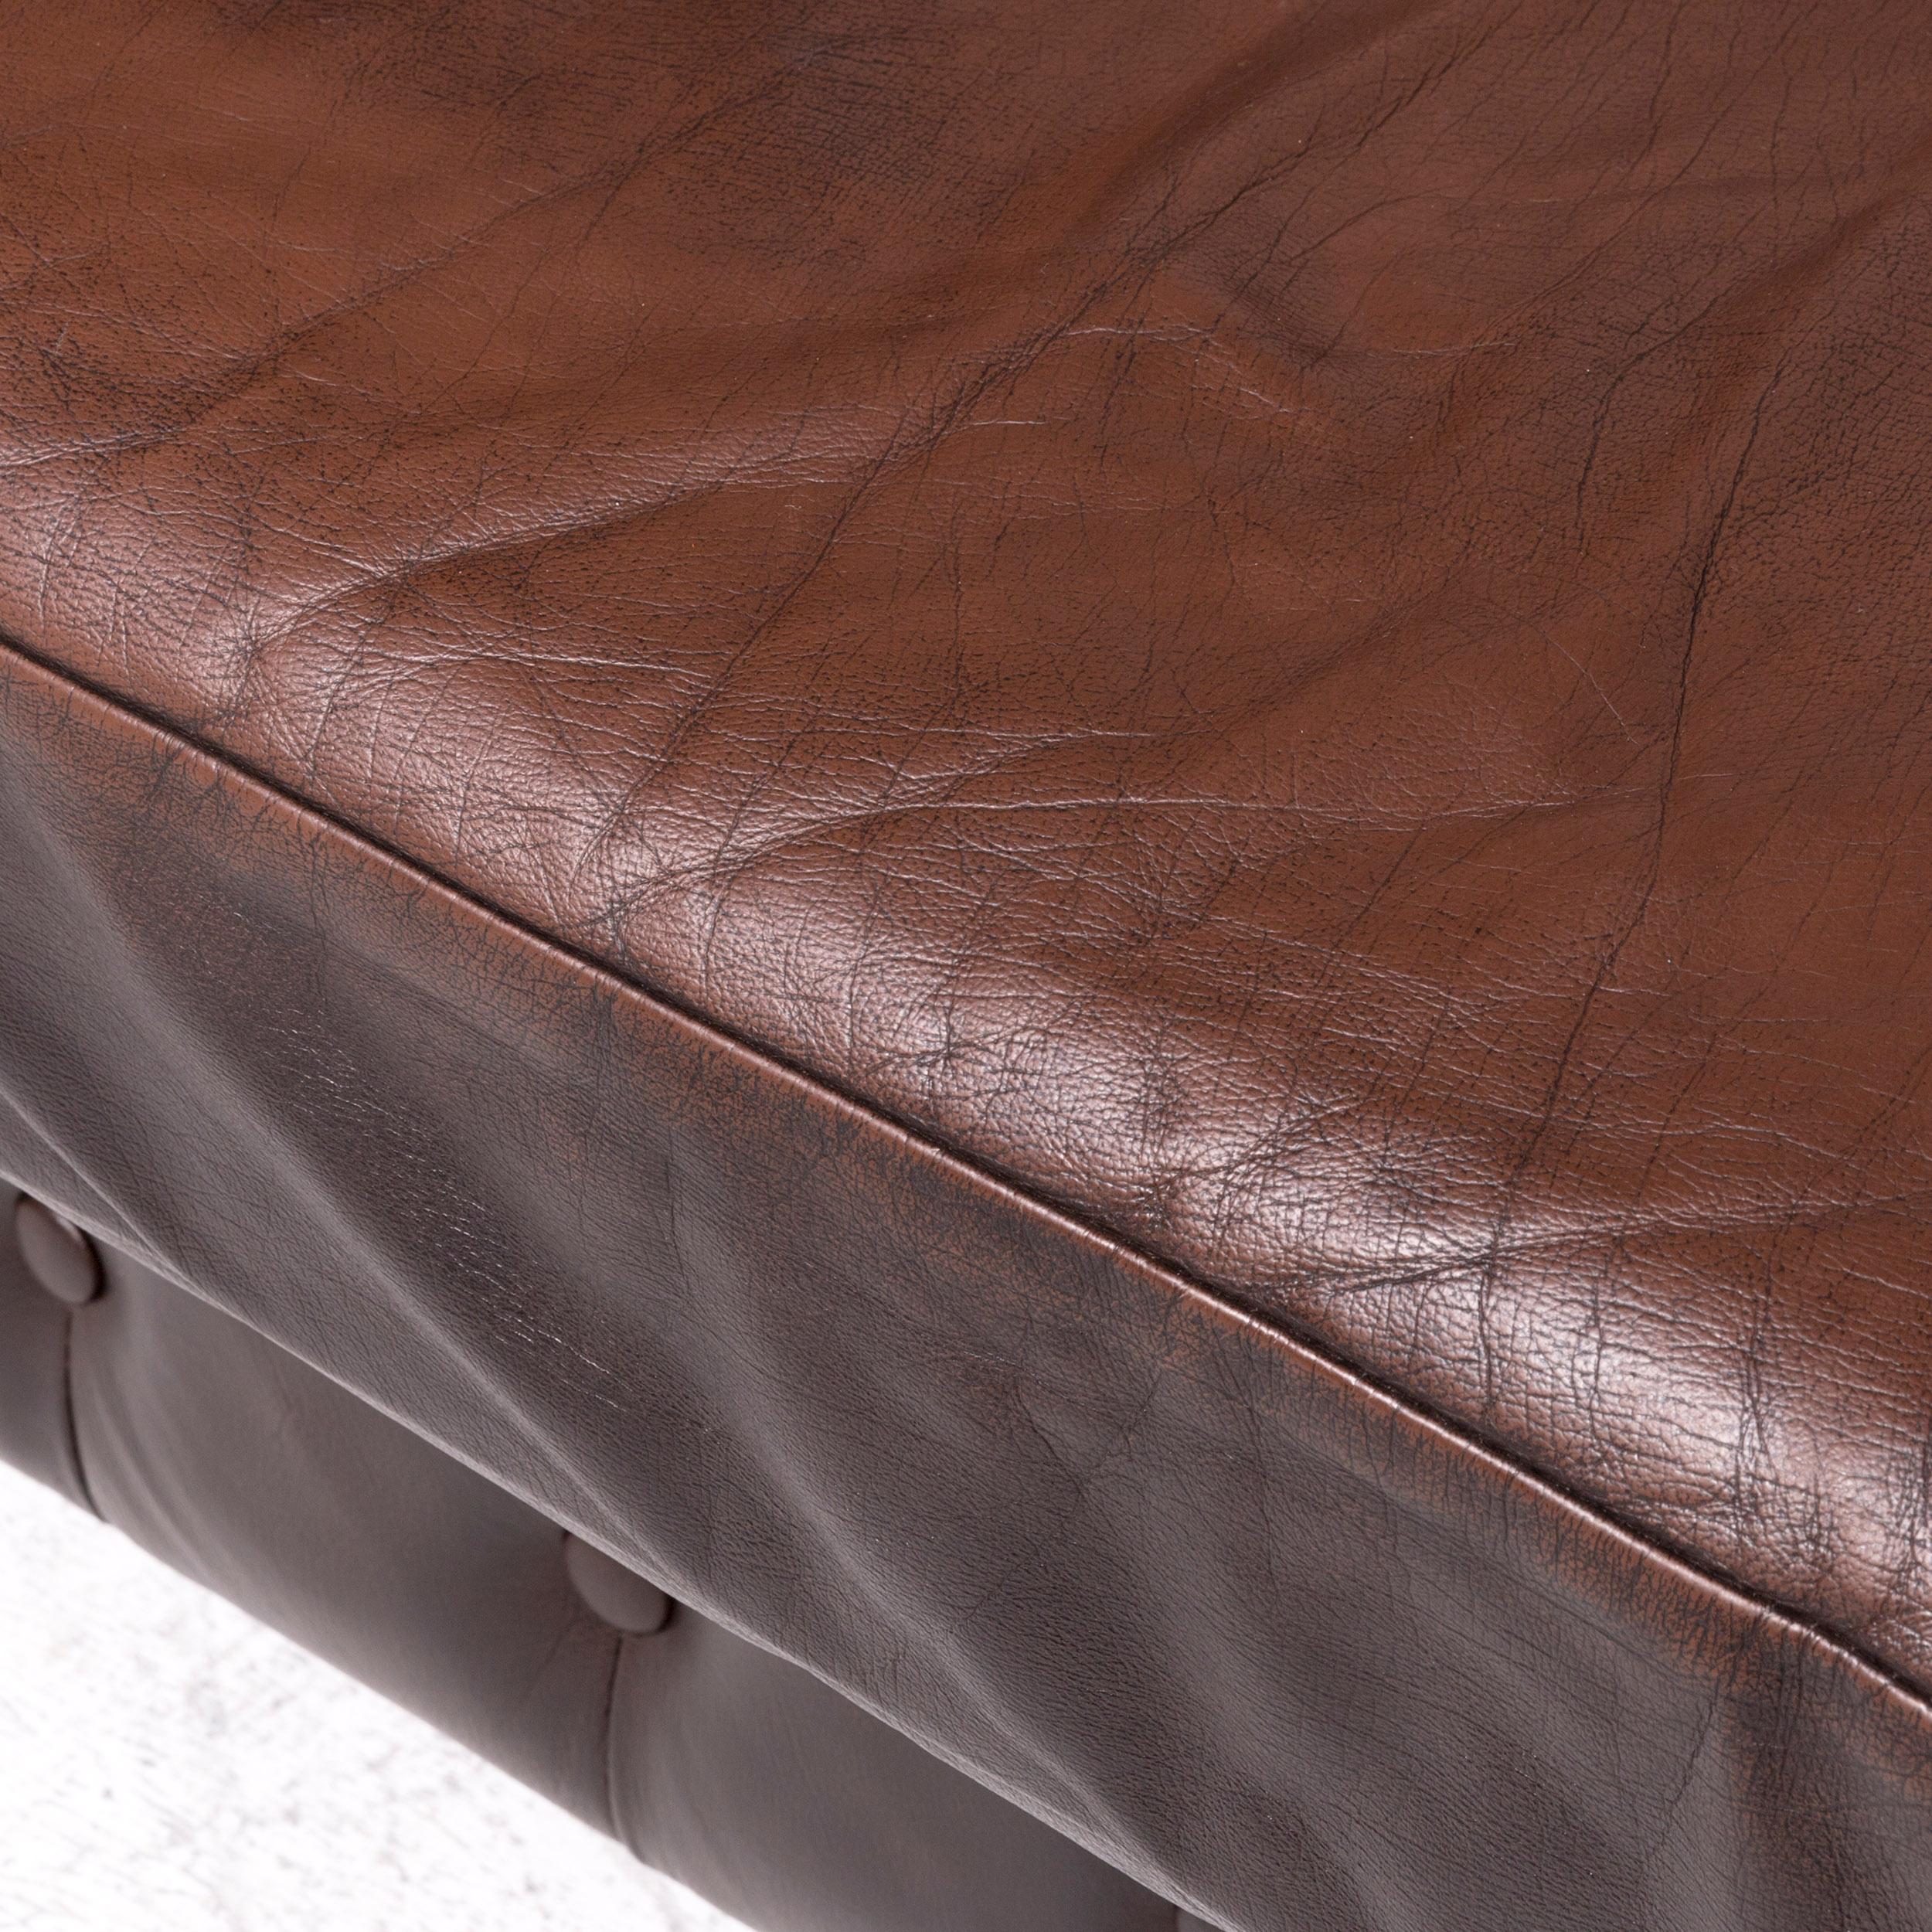 Modern Chesterfield Leather Sofa Brown Genuine Leather Three-Seat Couch Vintage Retro